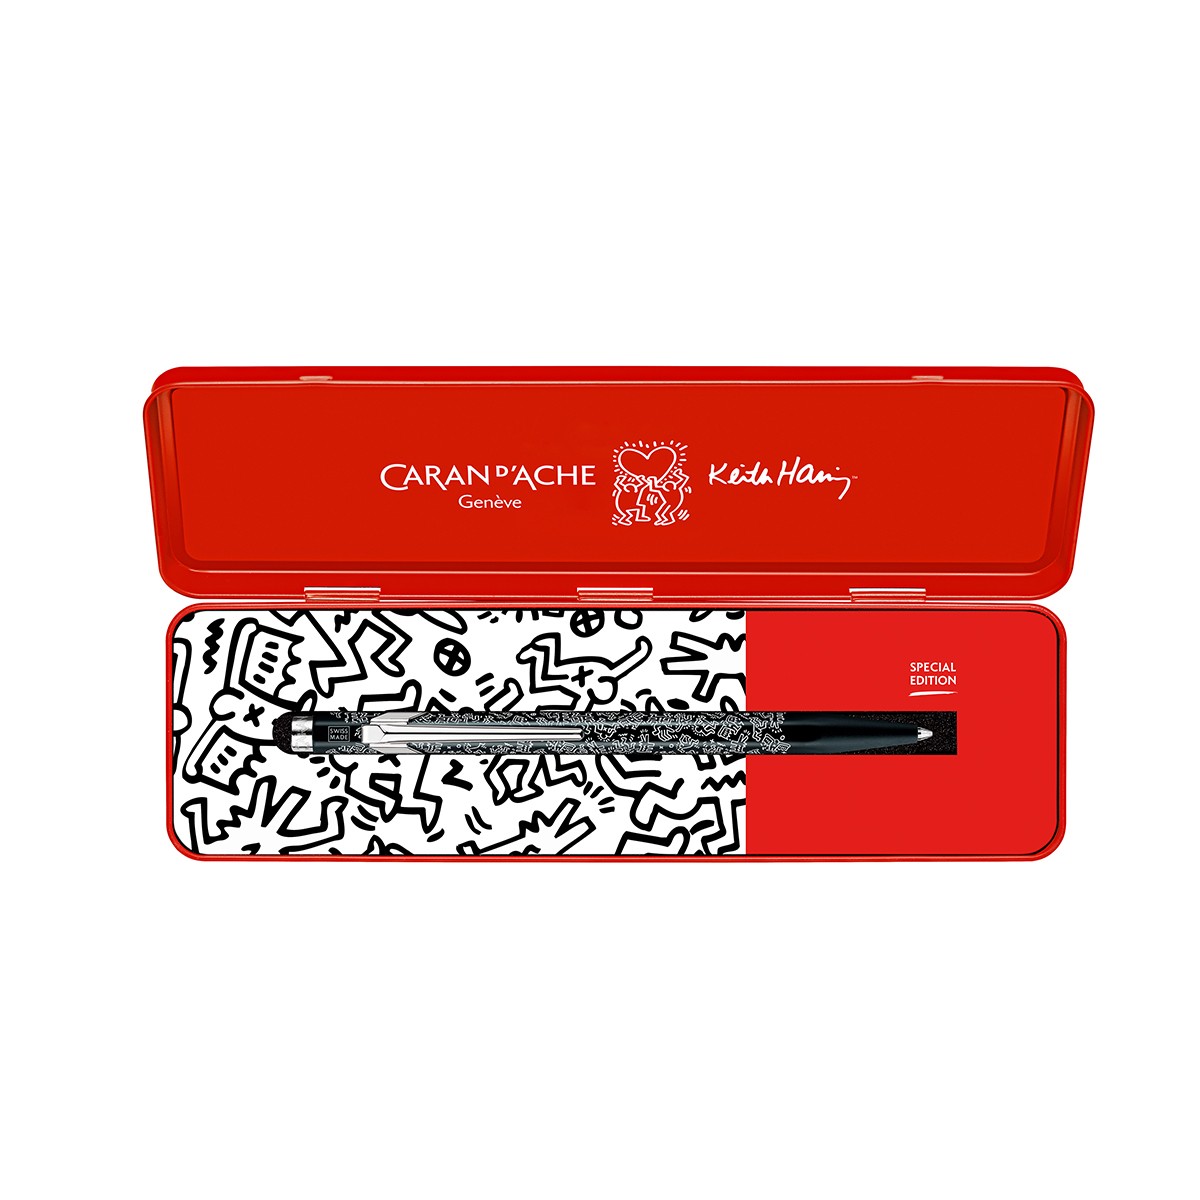 CARAN D'ACHE x Keith Haring Στυλό Διαρκείας 849 Μαύρο - Special Edition